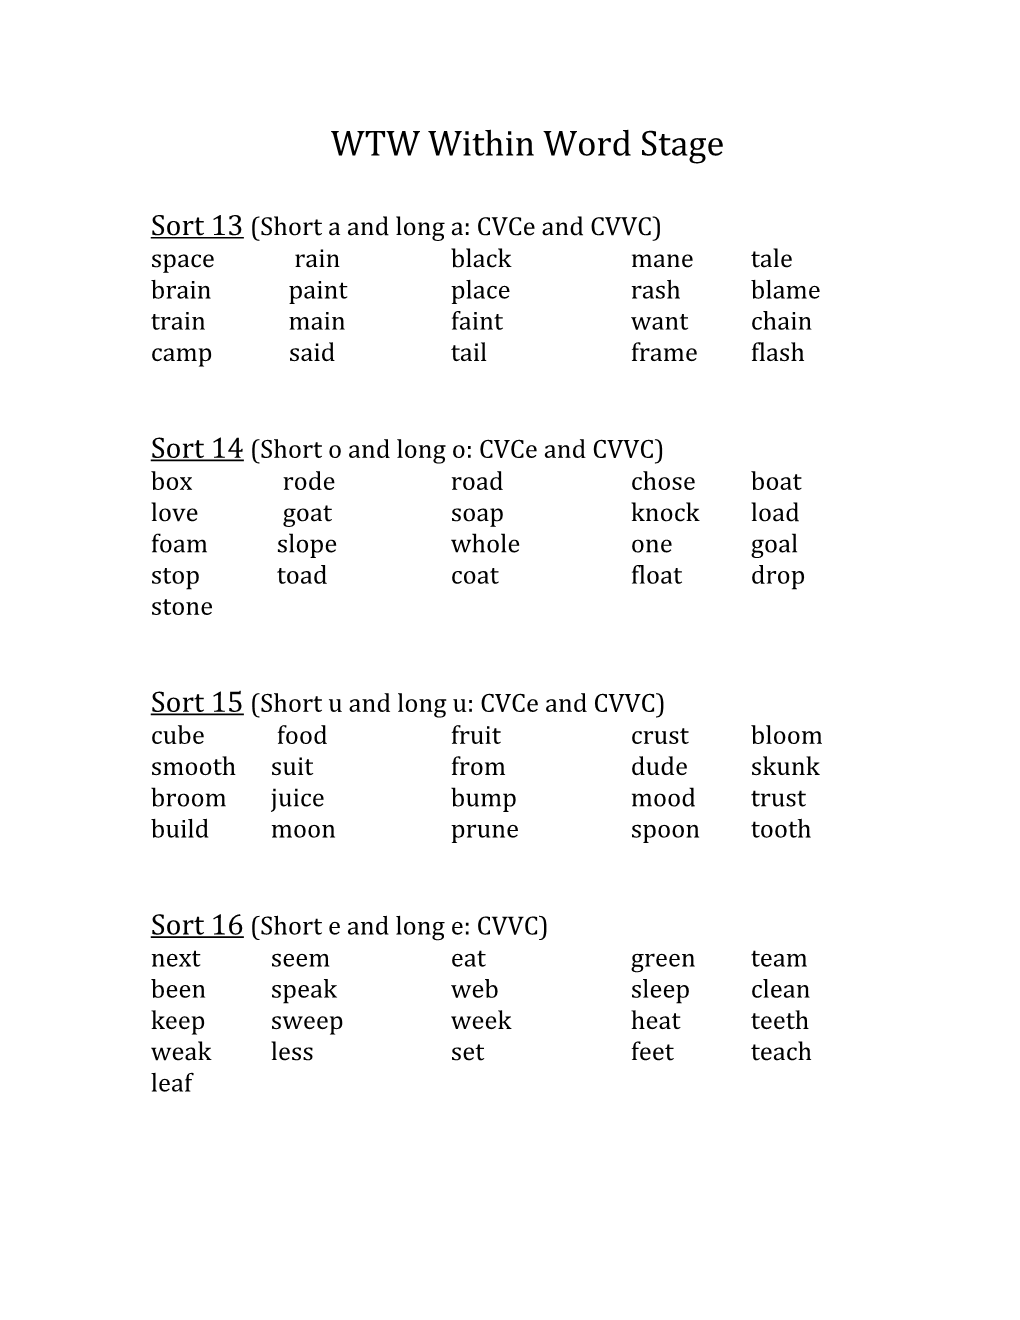 Sort 13 (Short a and Long A: Cvce and CVVC)